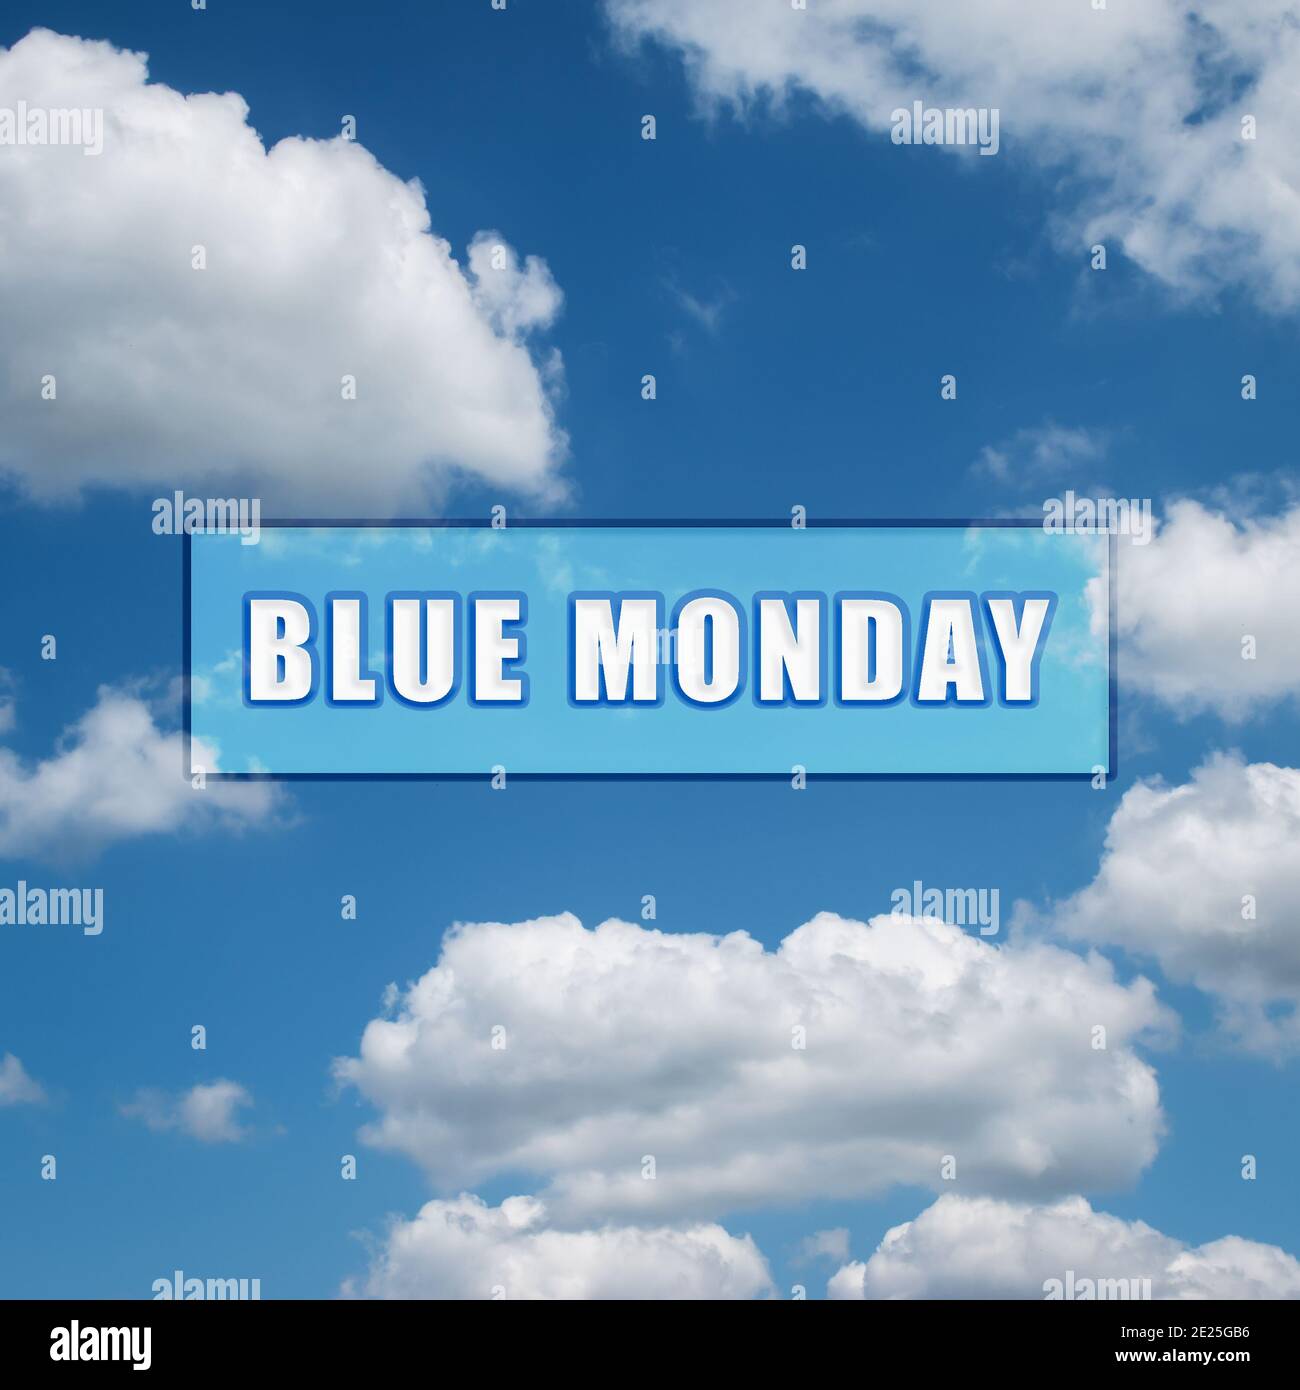 Blue Monday, the most depressing day of the year. Clouds sky background. Stock Photo